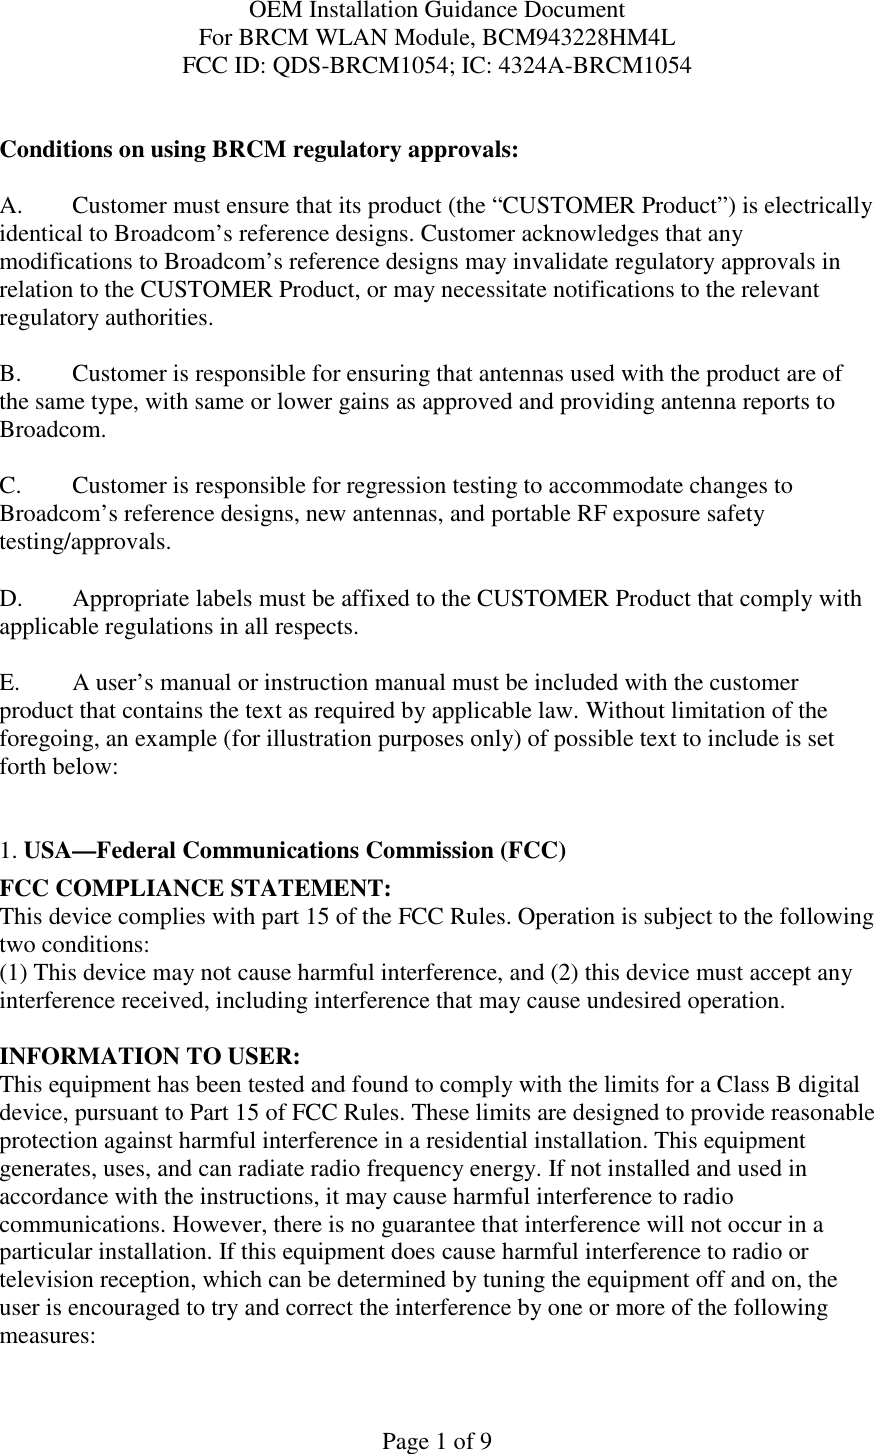 OEM Installation Guidance Document For BRCM WLAN Module, BCM943228HM4L FCC ID: QDS-BRCM1054; IC: 4324A-BRCM1054  Page 1 of 9  Conditions on using BRCM regulatory approvals:   A.  Customer must ensure that its product (the “CUSTOMER Product”) is electrically identical to Broadcom’s reference designs. Customer acknowledges that any modifications to Broadcom’s reference designs may invalidate regulatory approvals in relation to the CUSTOMER Product, or may necessitate notifications to the relevant regulatory authorities.  B.   Customer is responsible for ensuring that antennas used with the product are of the same type, with same or lower gains as approved and providing antenna reports to Broadcom.  C.   Customer is responsible for regression testing to accommodate changes to Broadcom’s reference designs, new antennas, and portable RF exposure safety testing/approvals.  D.  Appropriate labels must be affixed to the CUSTOMER Product that comply with applicable regulations in all respects.    E.  A user’s manual or instruction manual must be included with the customer product that contains the text as required by applicable law. Without limitation of the foregoing, an example (for illustration purposes only) of possible text to include is set forth below:    1. USA—Federal Communications Commission (FCC) FCC COMPLIANCE STATEMENT: This device complies with part 15 of the FCC Rules. Operation is subject to the following two conditions: (1) This device may not cause harmful interference, and (2) this device must accept any interference received, including interference that may cause undesired operation.  INFORMATION TO USER: This equipment has been tested and found to comply with the limits for a Class B digital device, pursuant to Part 15 of FCC Rules. These limits are designed to provide reasonable protection against harmful interference in a residential installation. This equipment generates, uses, and can radiate radio frequency energy. If not installed and used in accordance with the instructions, it may cause harmful interference to radio communications. However, there is no guarantee that interference will not occur in a particular installation. If this equipment does cause harmful interference to radio or television reception, which can be determined by tuning the equipment off and on, the user is encouraged to try and correct the interference by one or more of the following measures:    